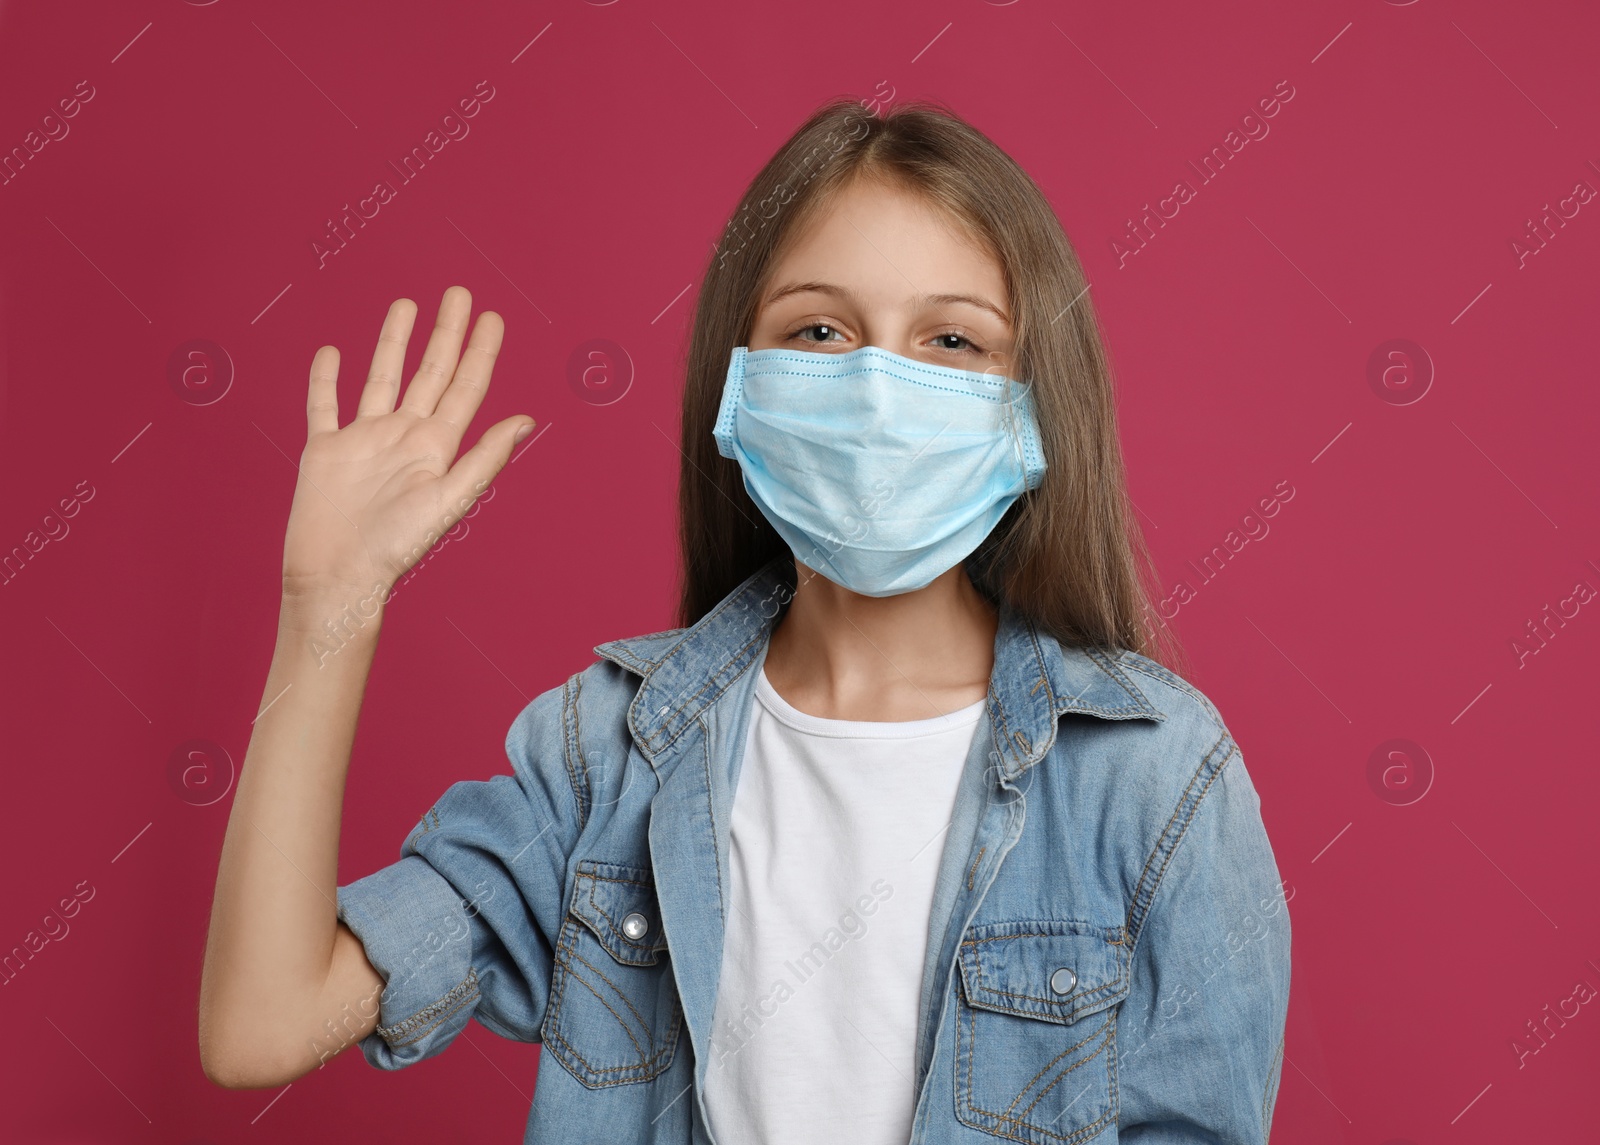 Photo of Little girl in protective mask showing hello gesture on crimson background. Keeping social distance during coronavirus pandemic